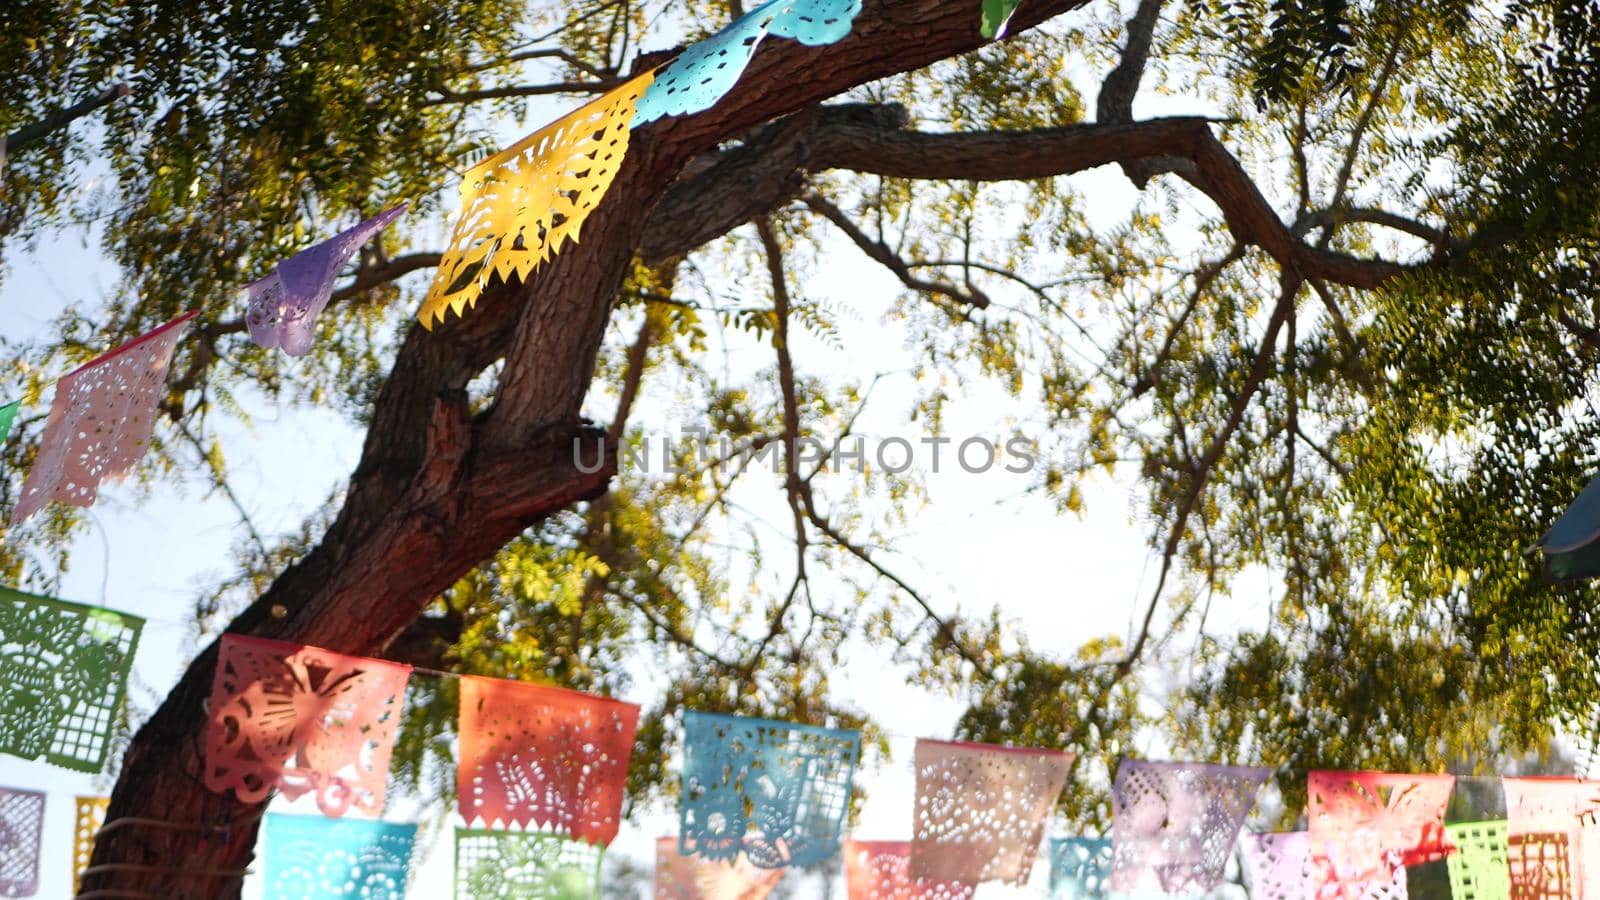 Colorful mexican perforated papel picado banner, festival colourful paper garland. Multi colored hispanic folk carved tissue flags, holiday or carnival. Authentic fiesta decoration in Latin America.